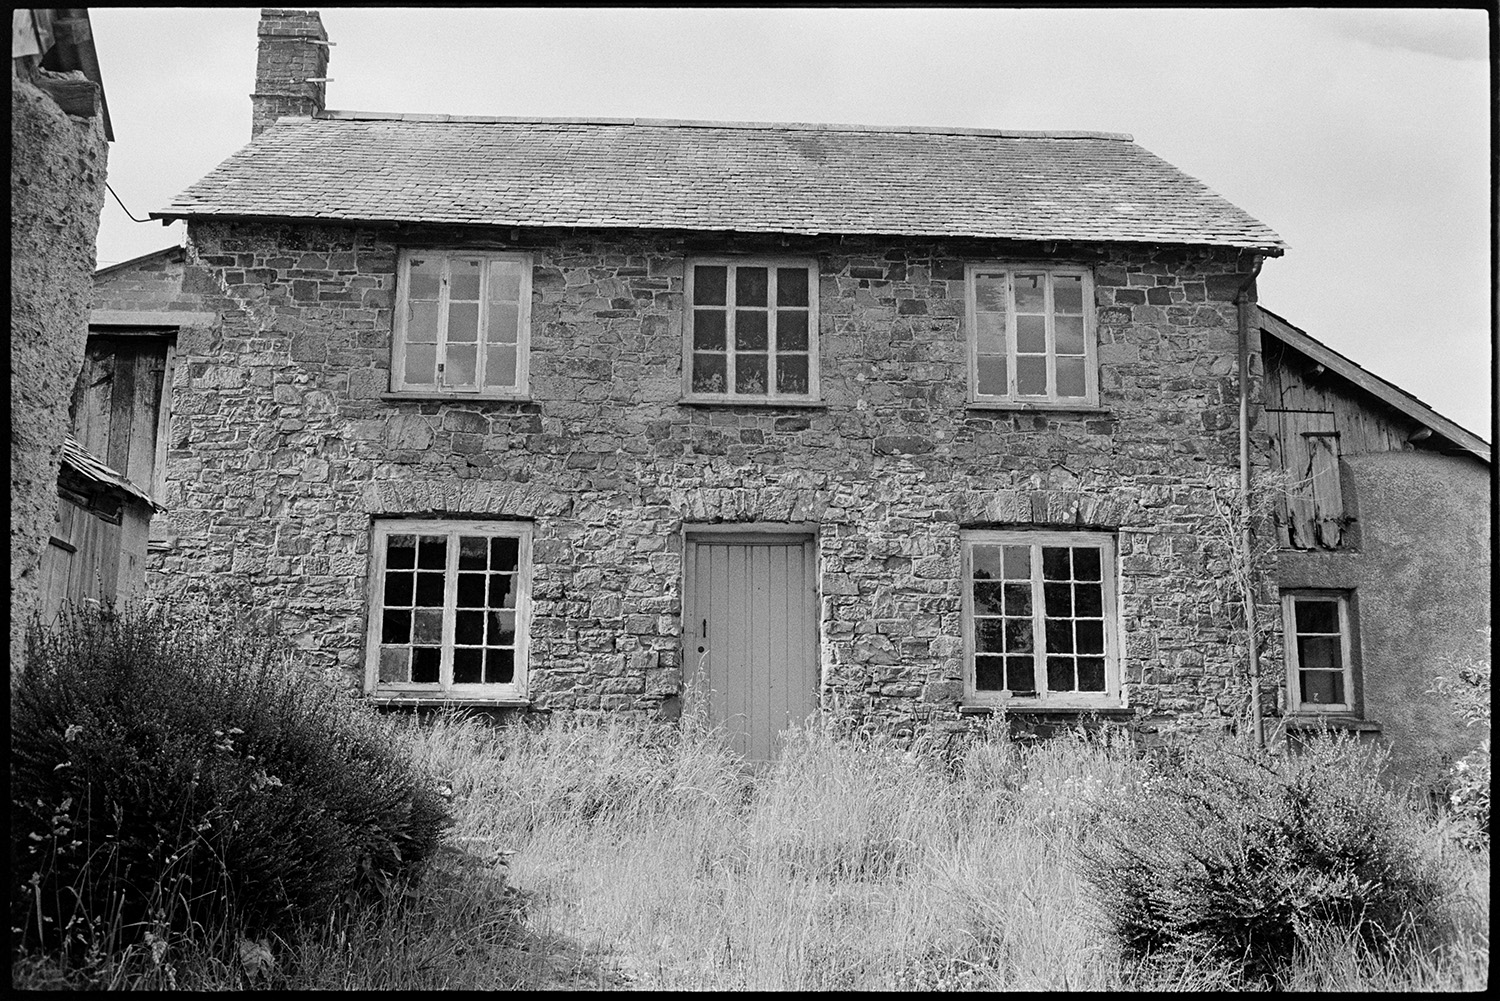 House, stone and slate, nice windows. 
[A stone and slate house with an overgrown garden near Bridge Reeve, Chulmleigh. Some of the windows are broken and barns can be seen adjacent to the house.]